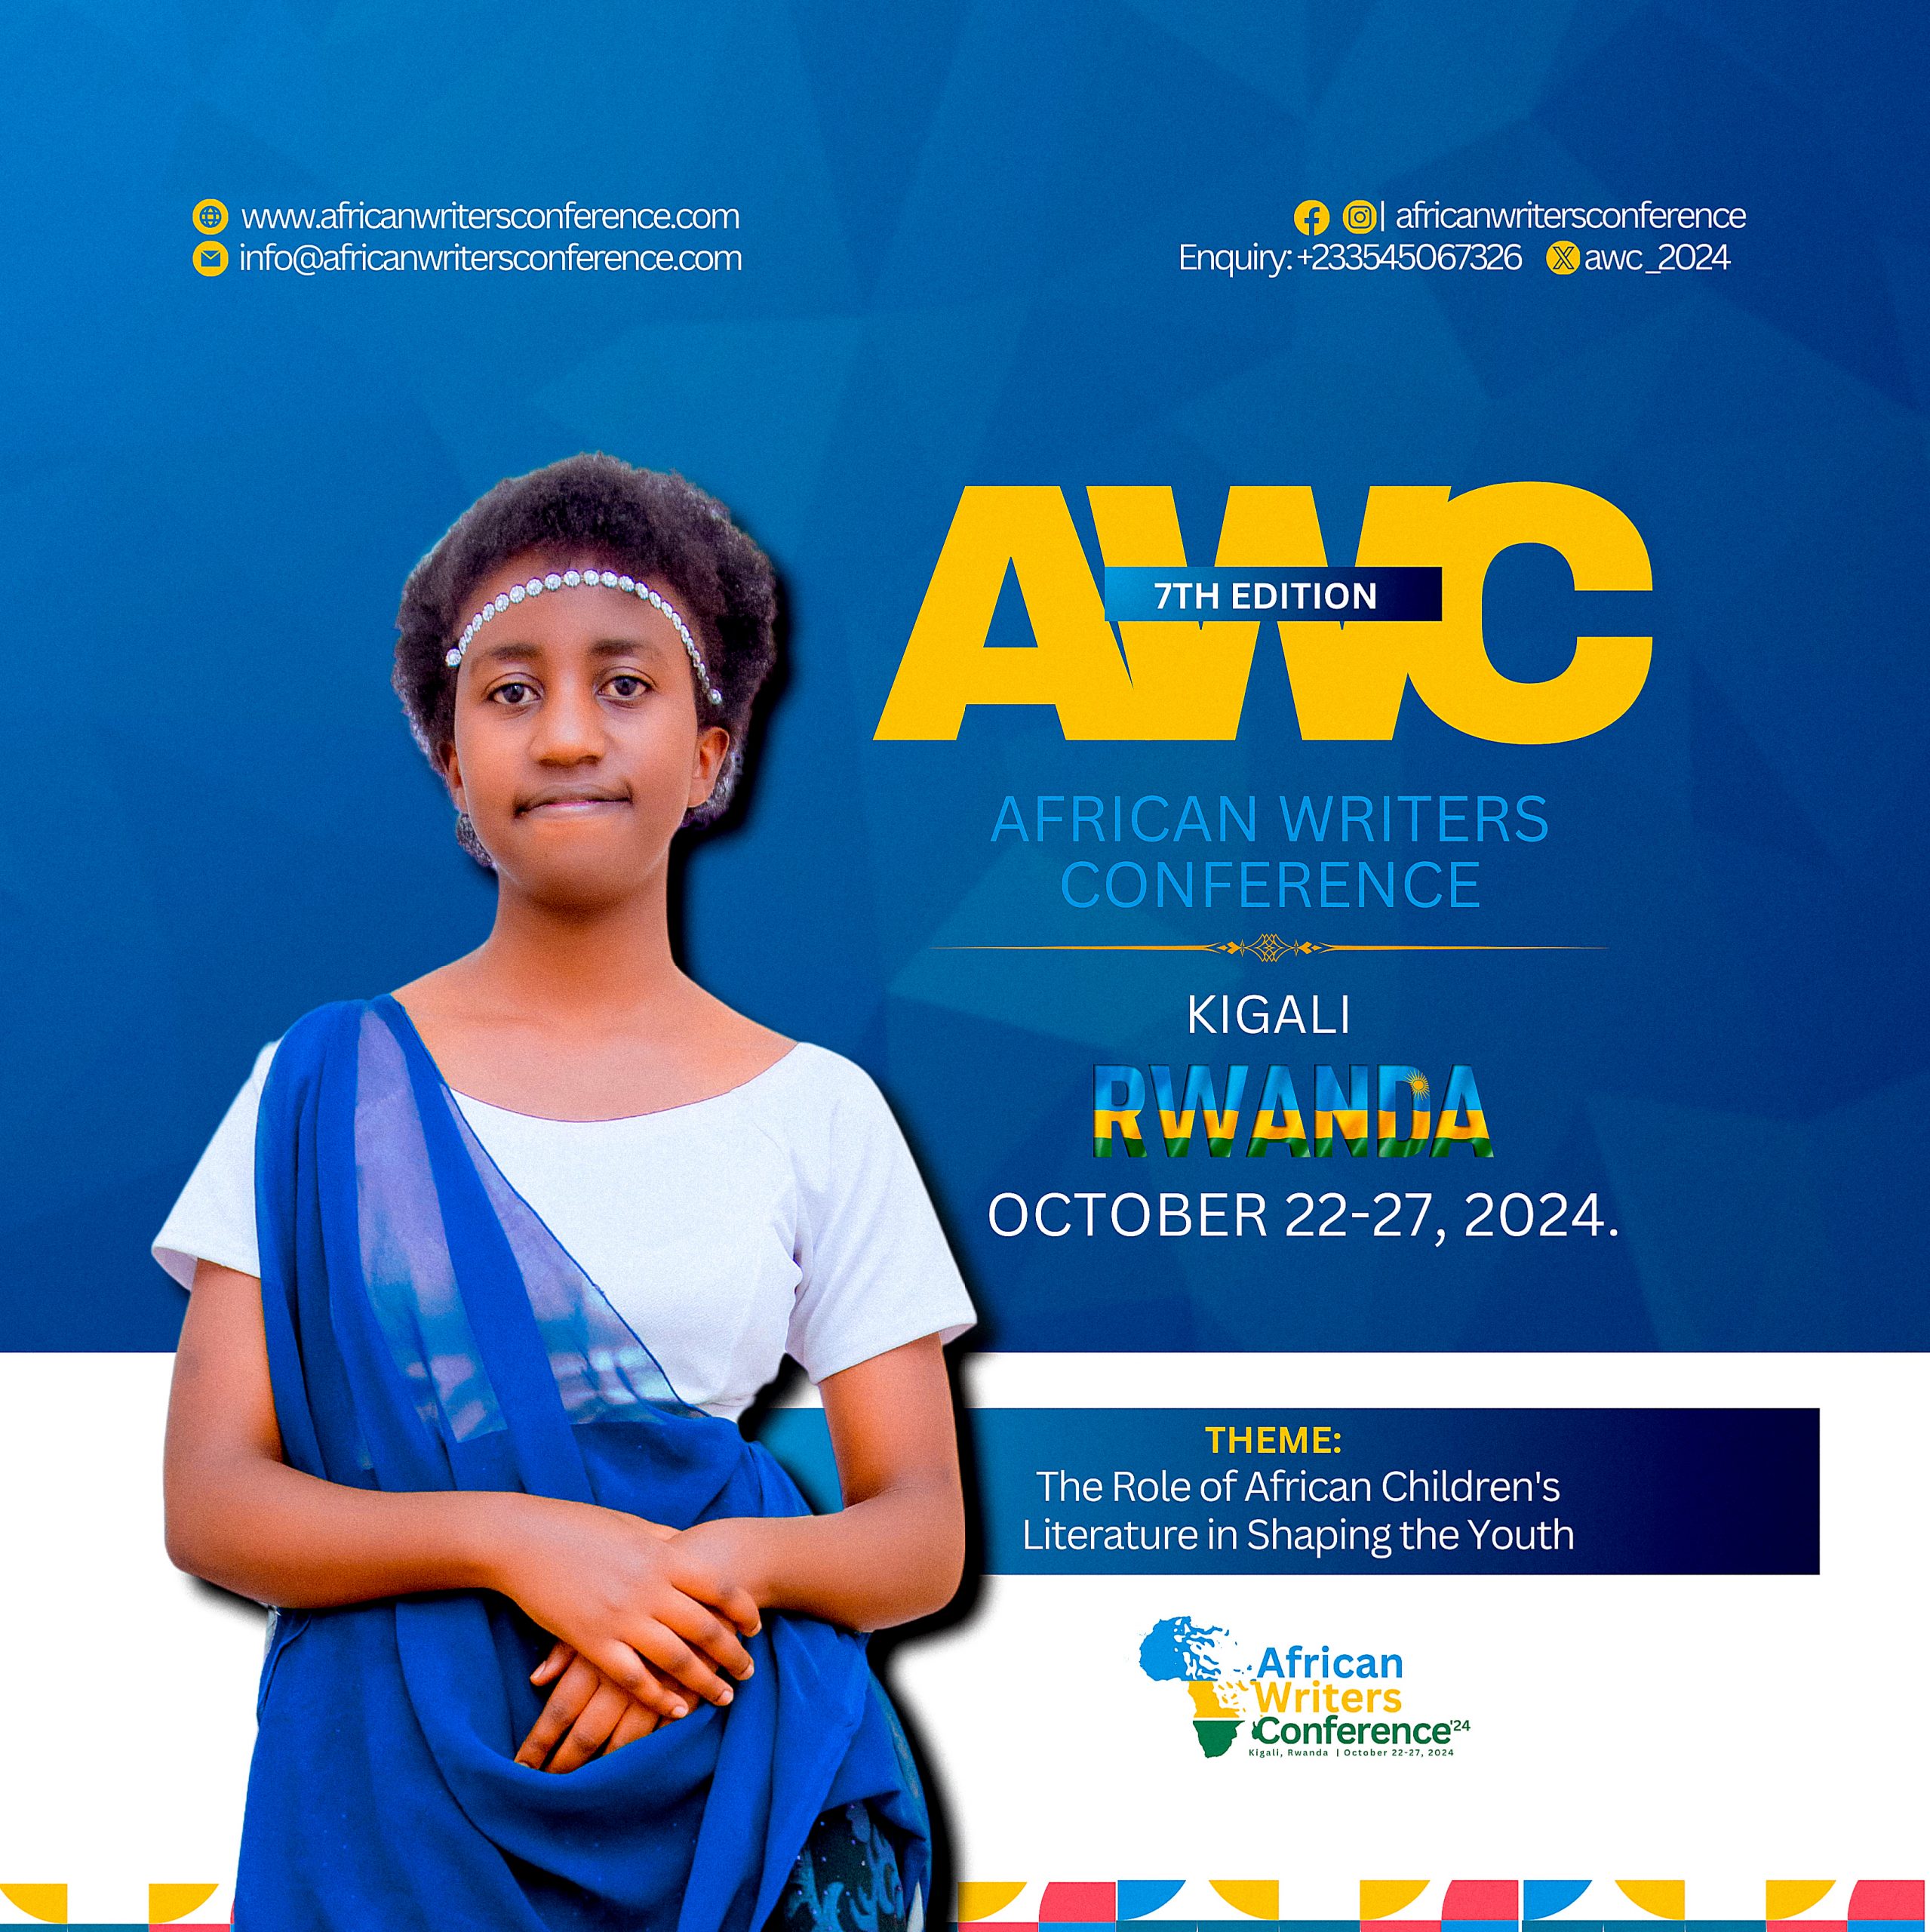 7th Edition of the African Writers Conference Comes to Kigali